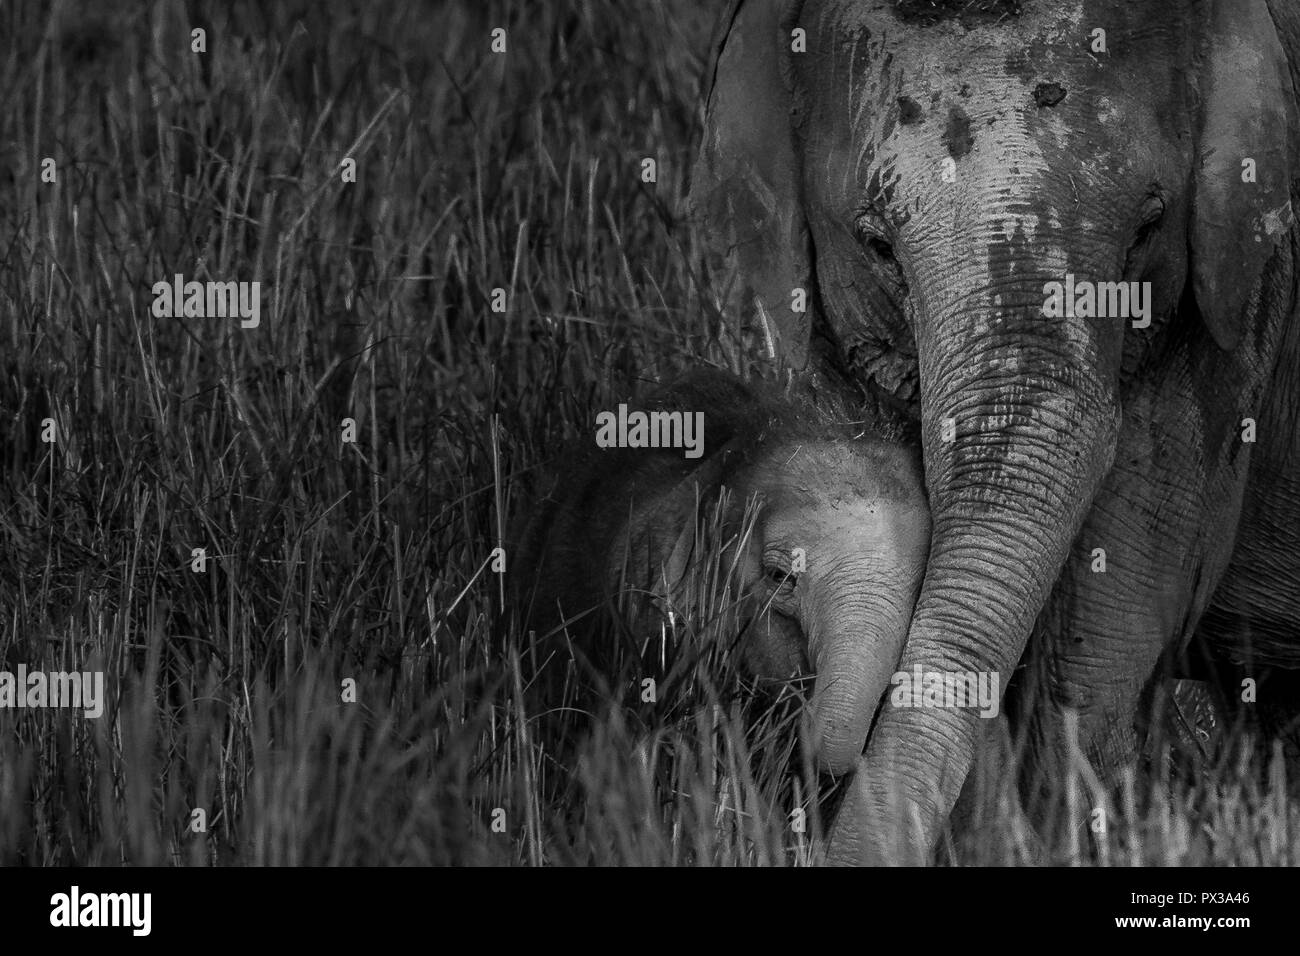 This image of Mother and Baby Elephant is taken at Kaziranga National Park in India. Stock Photo